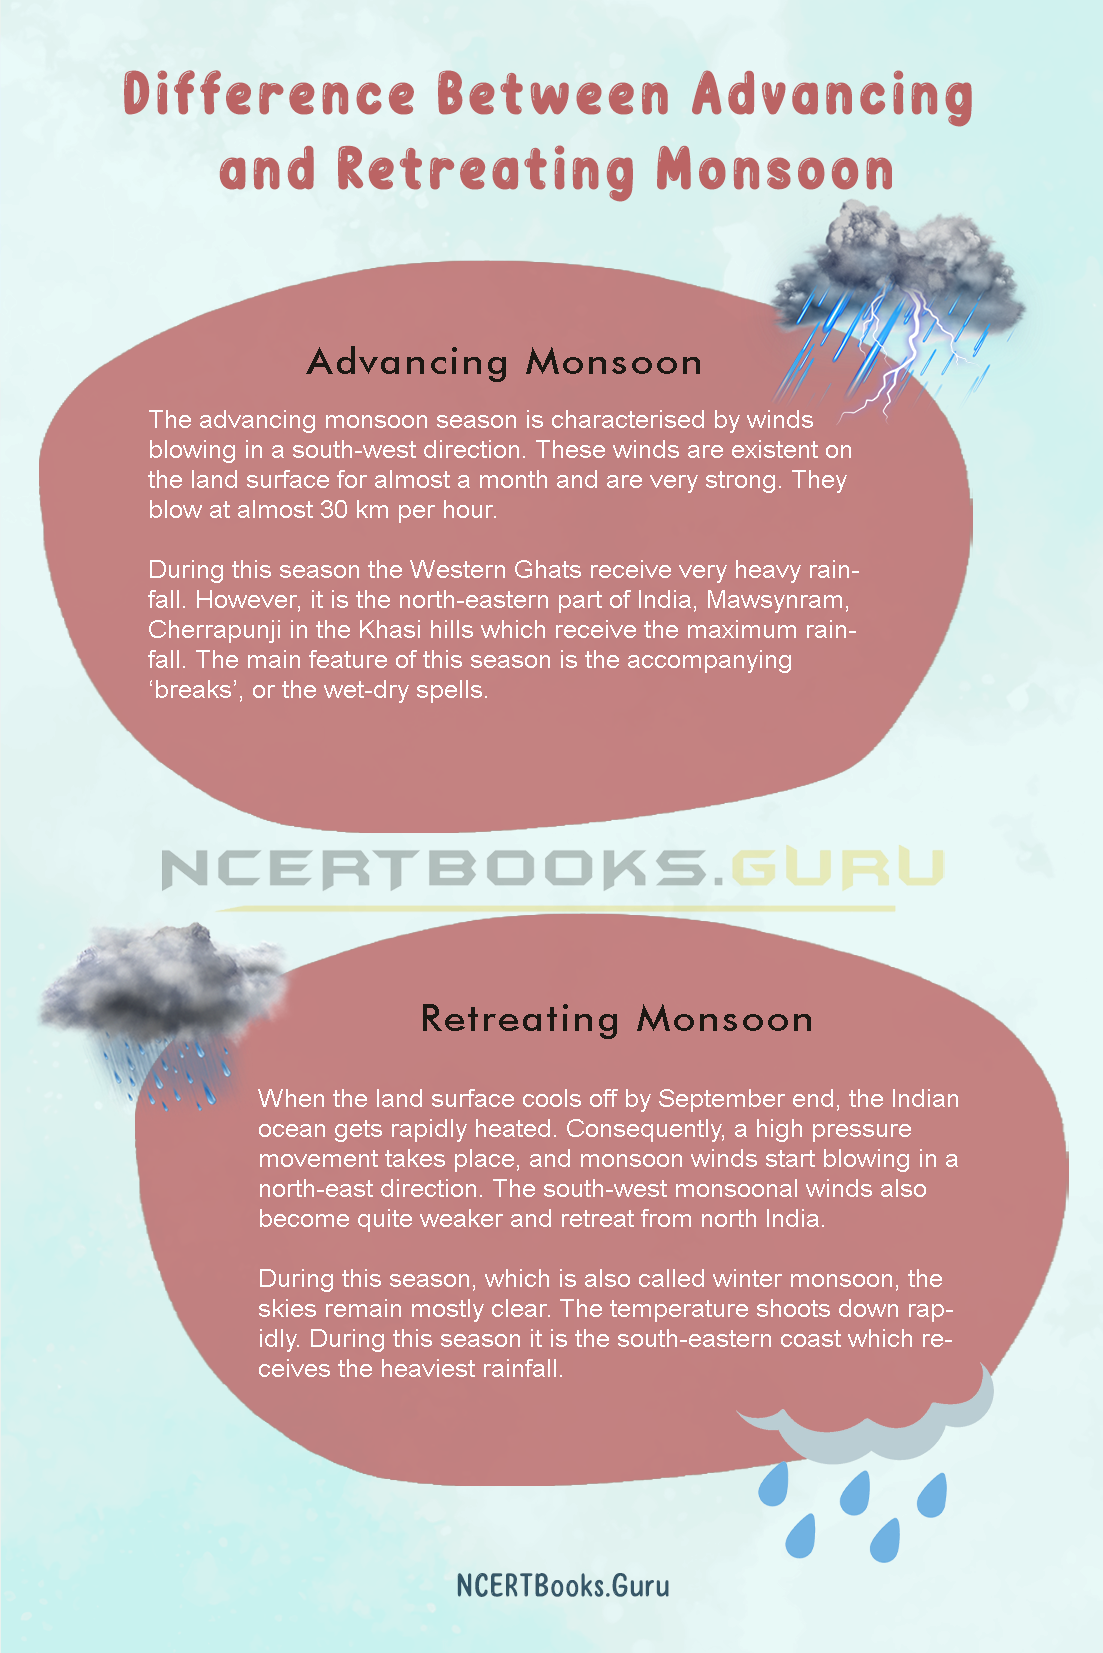 Difference Between Advancing and Retreating Monsoon & Their Similarities -  NCERT Books